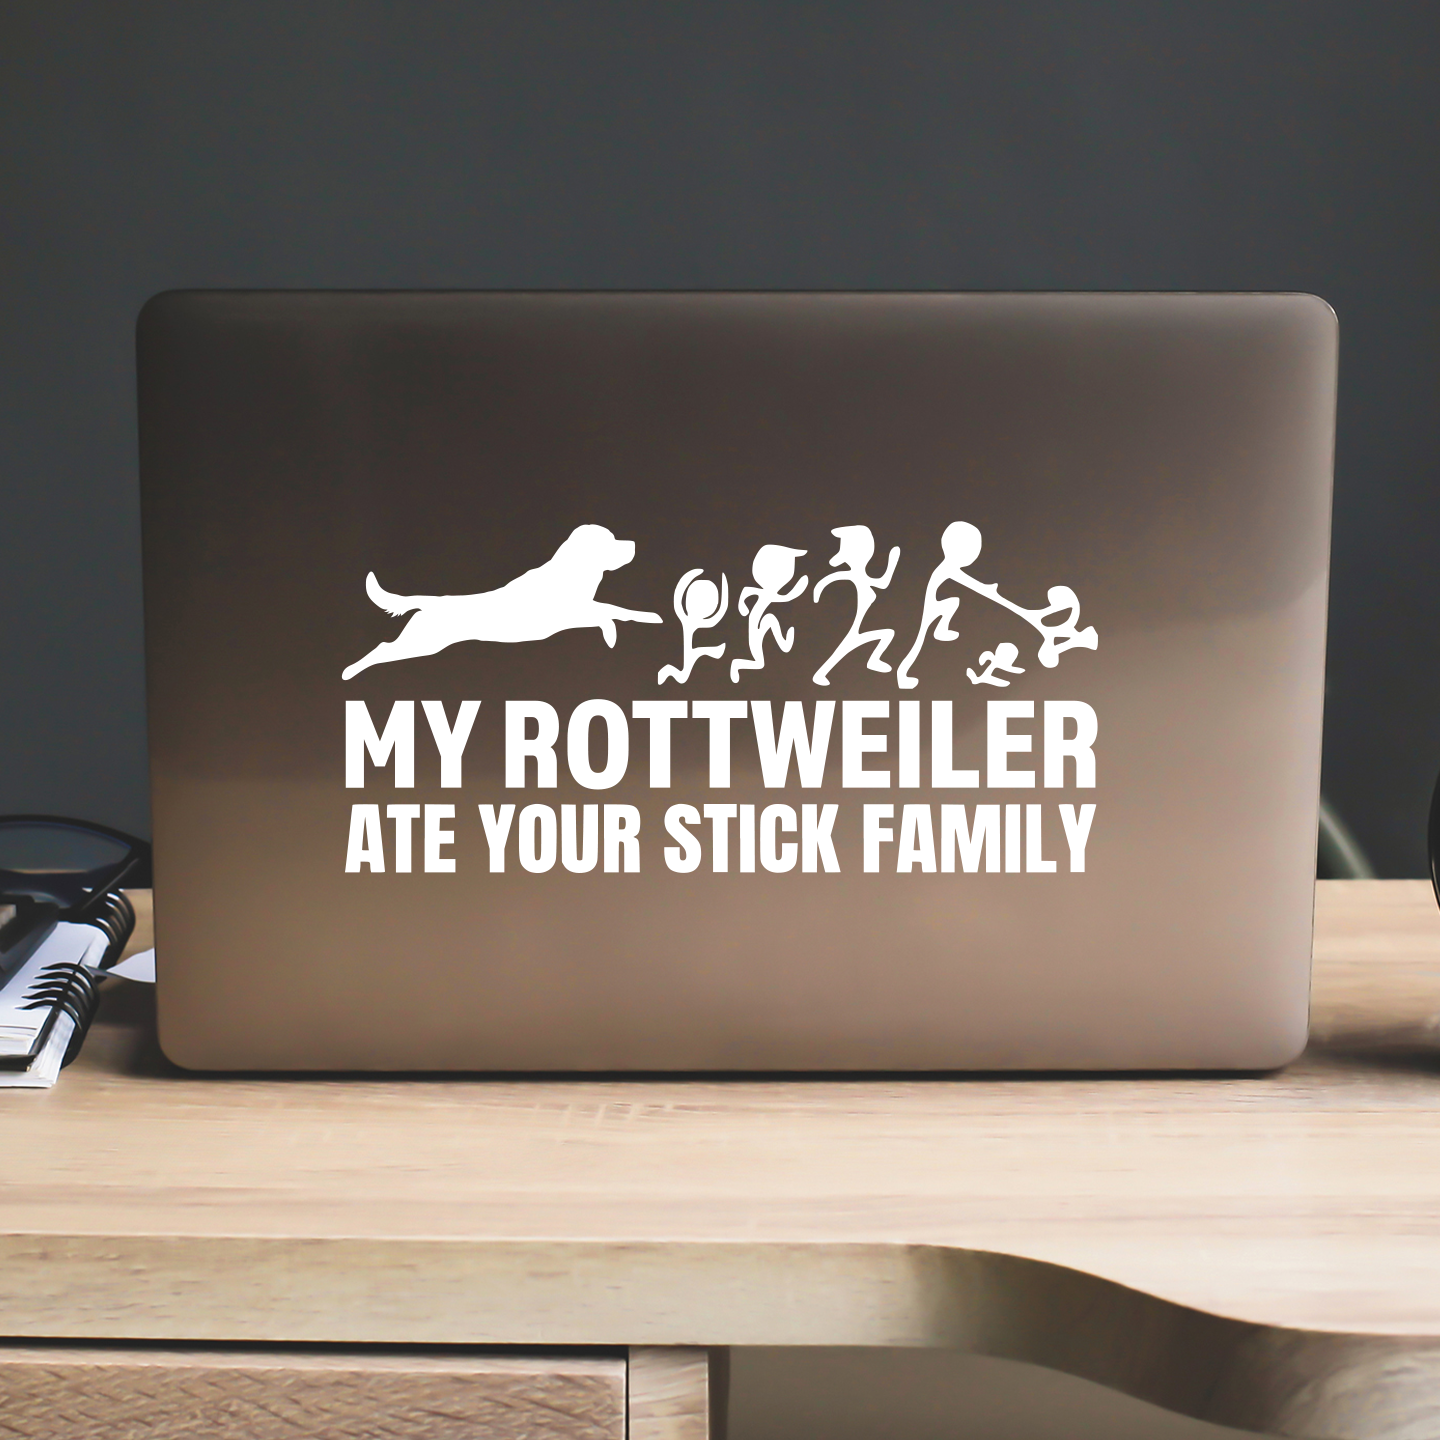 My Rottweiler Ate Your Stick Family Sticker